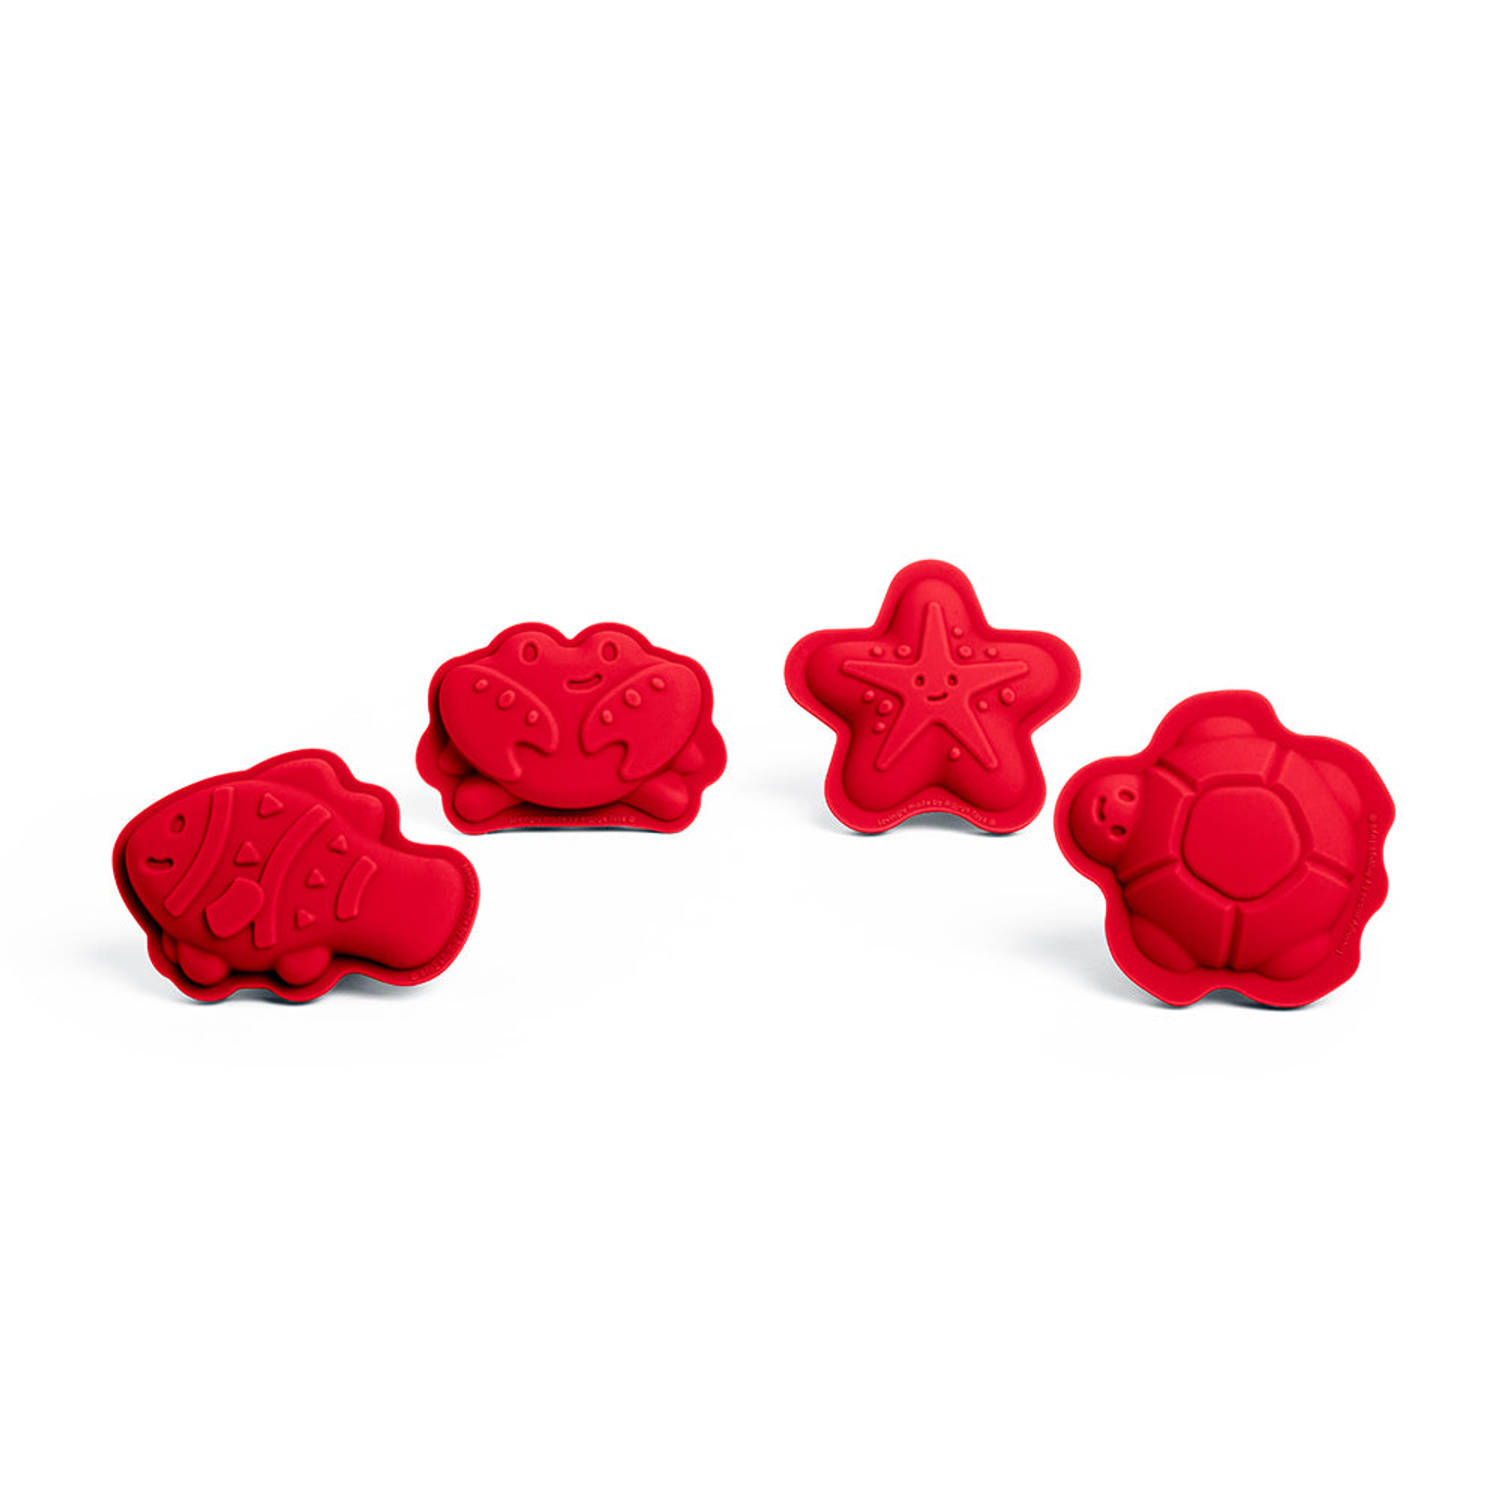 Bigjigs Cherry Red Character Sand Moulds